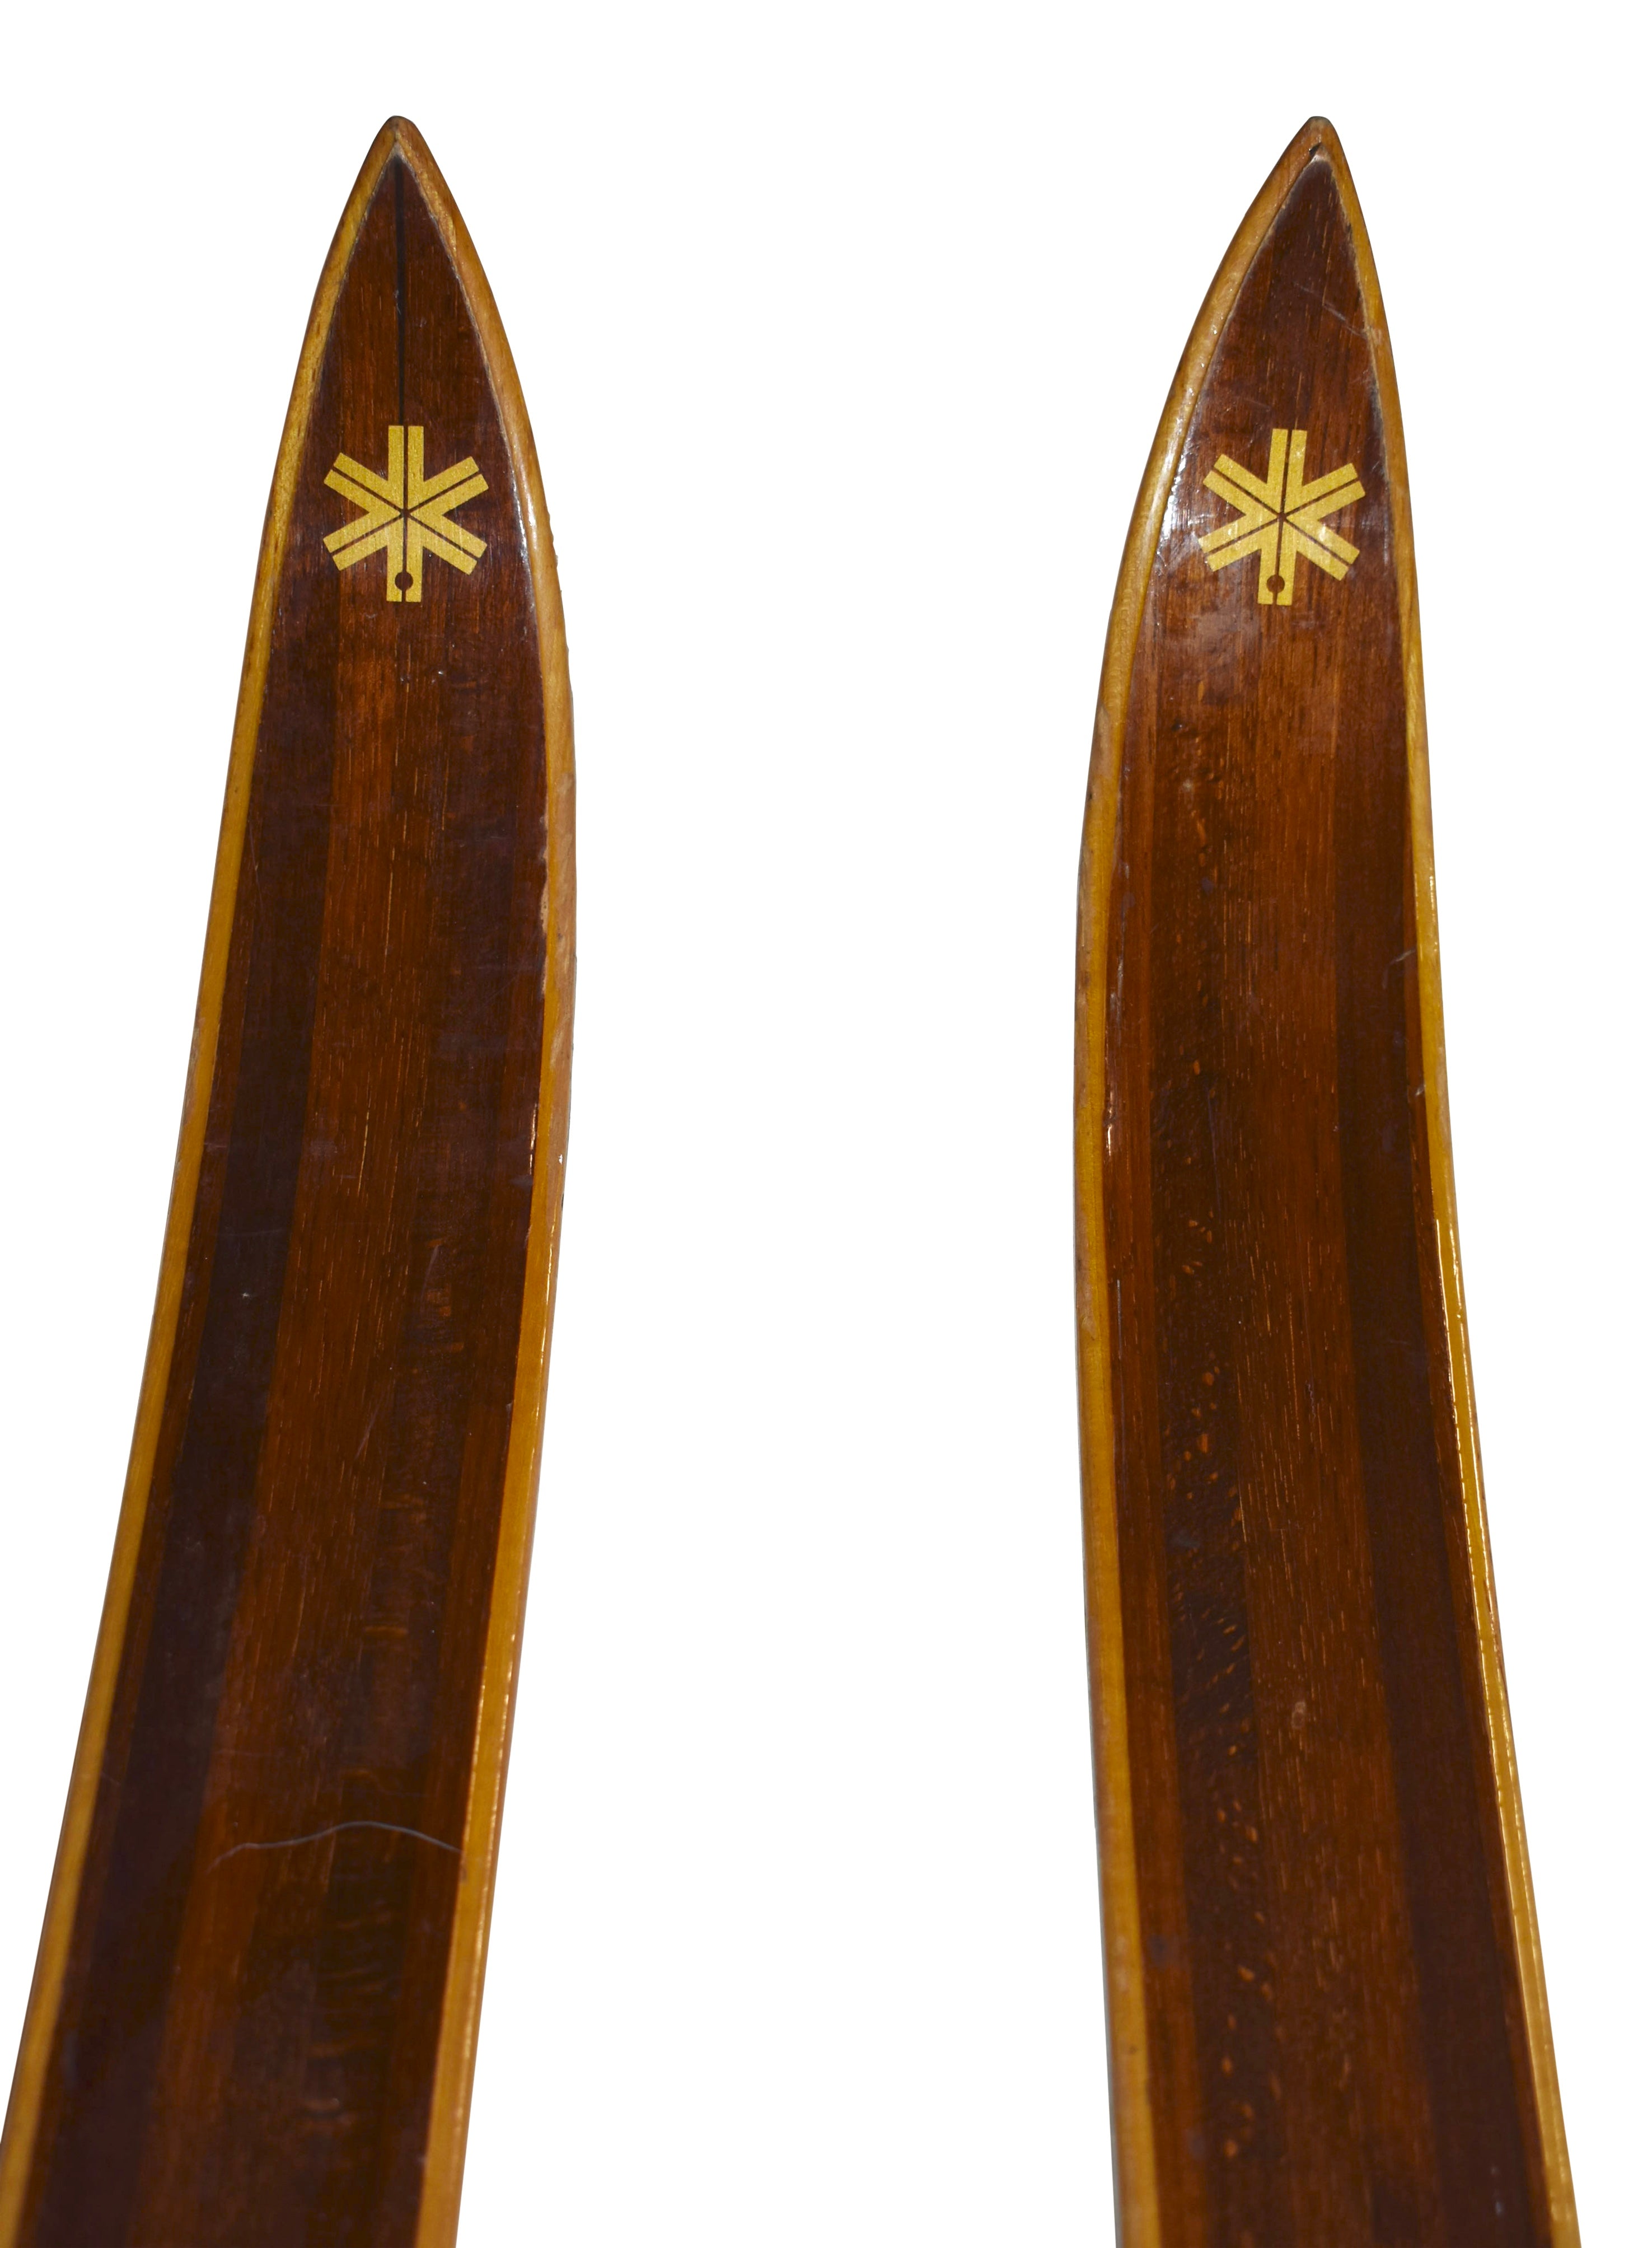 Cross-Country Bonna Norwegian Skis with Snabb Bindings and Leather Boots